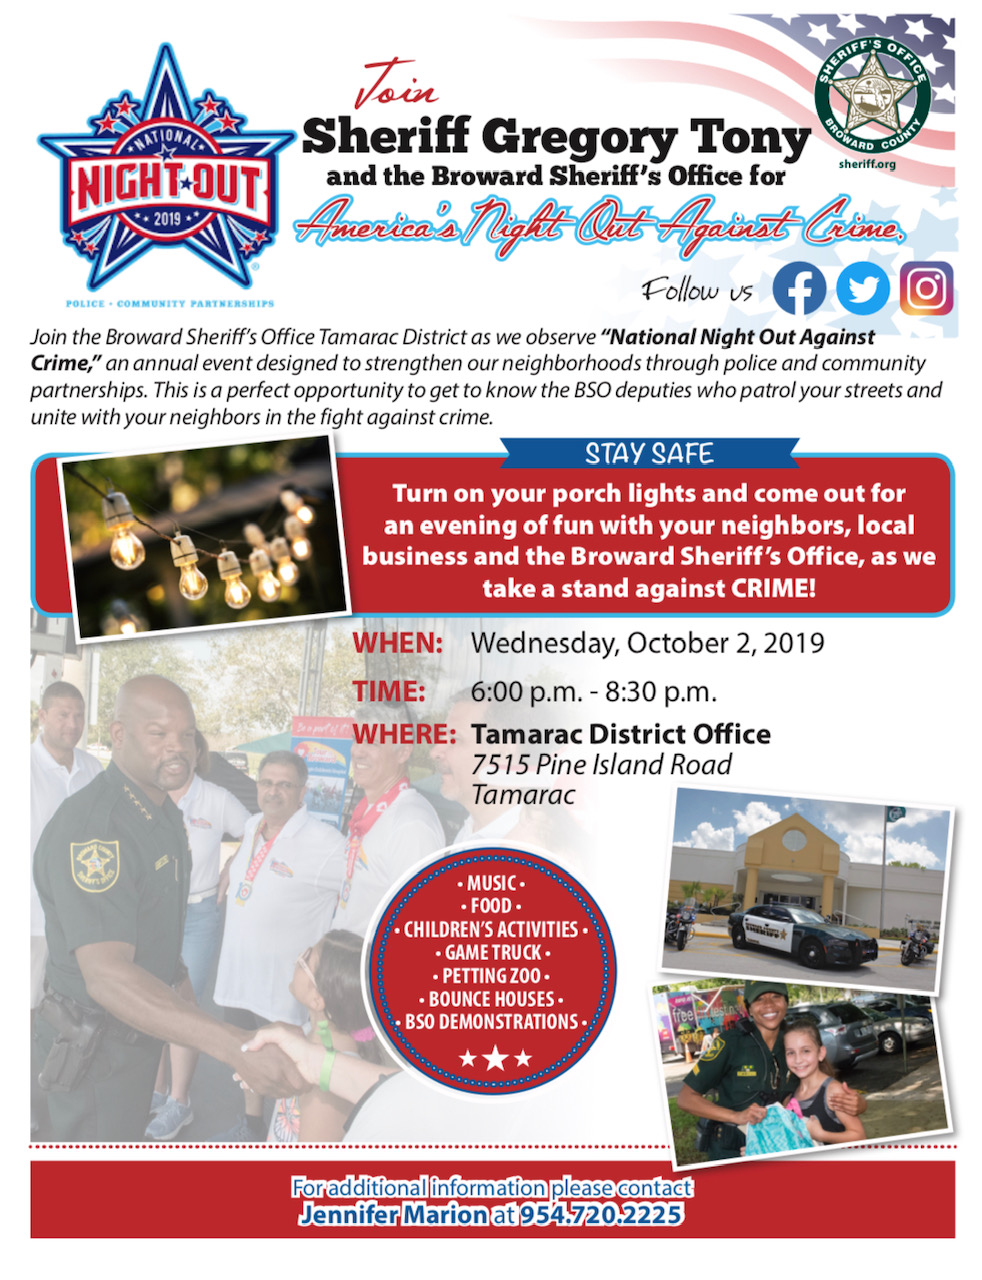 America’s Night Out Against Crime!